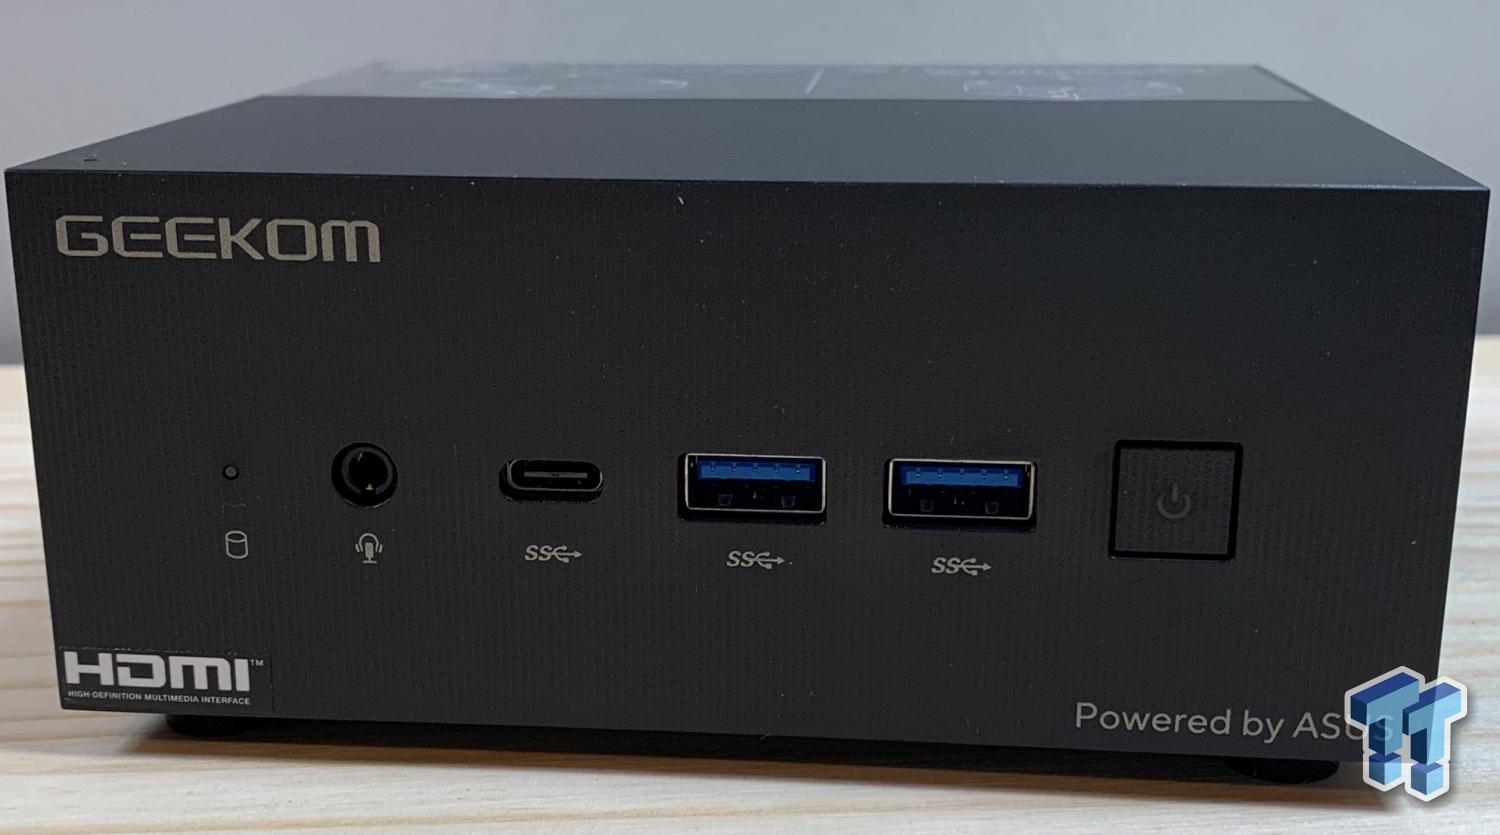 Geekom AS 6 Review an AMD Ryzen 9 Powered Mini PC - Page 4 of 4